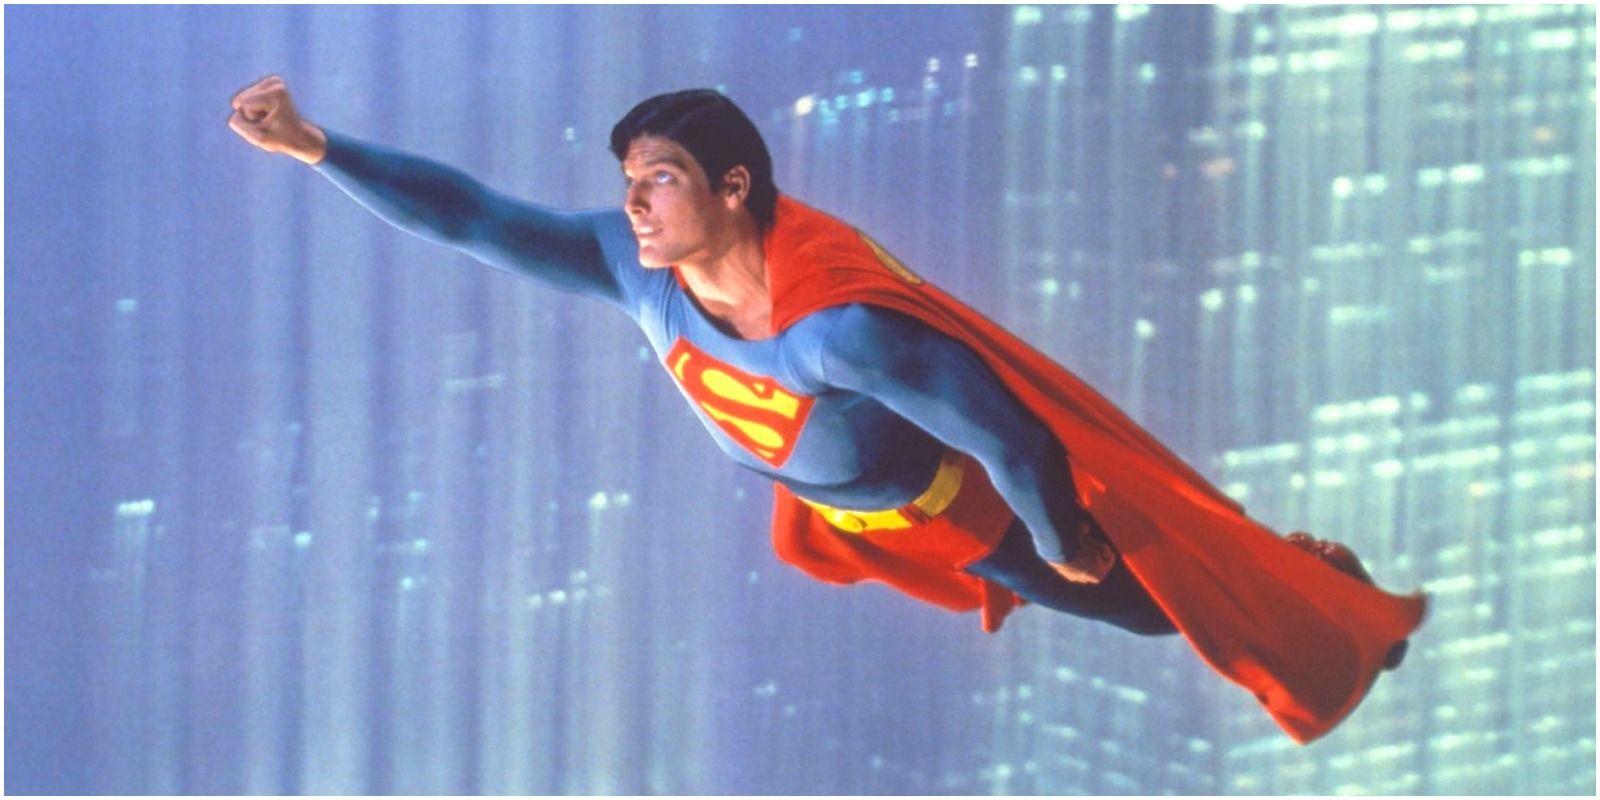 Christopher Reeve as Superman flying in his Fortress of Solitude from the first film